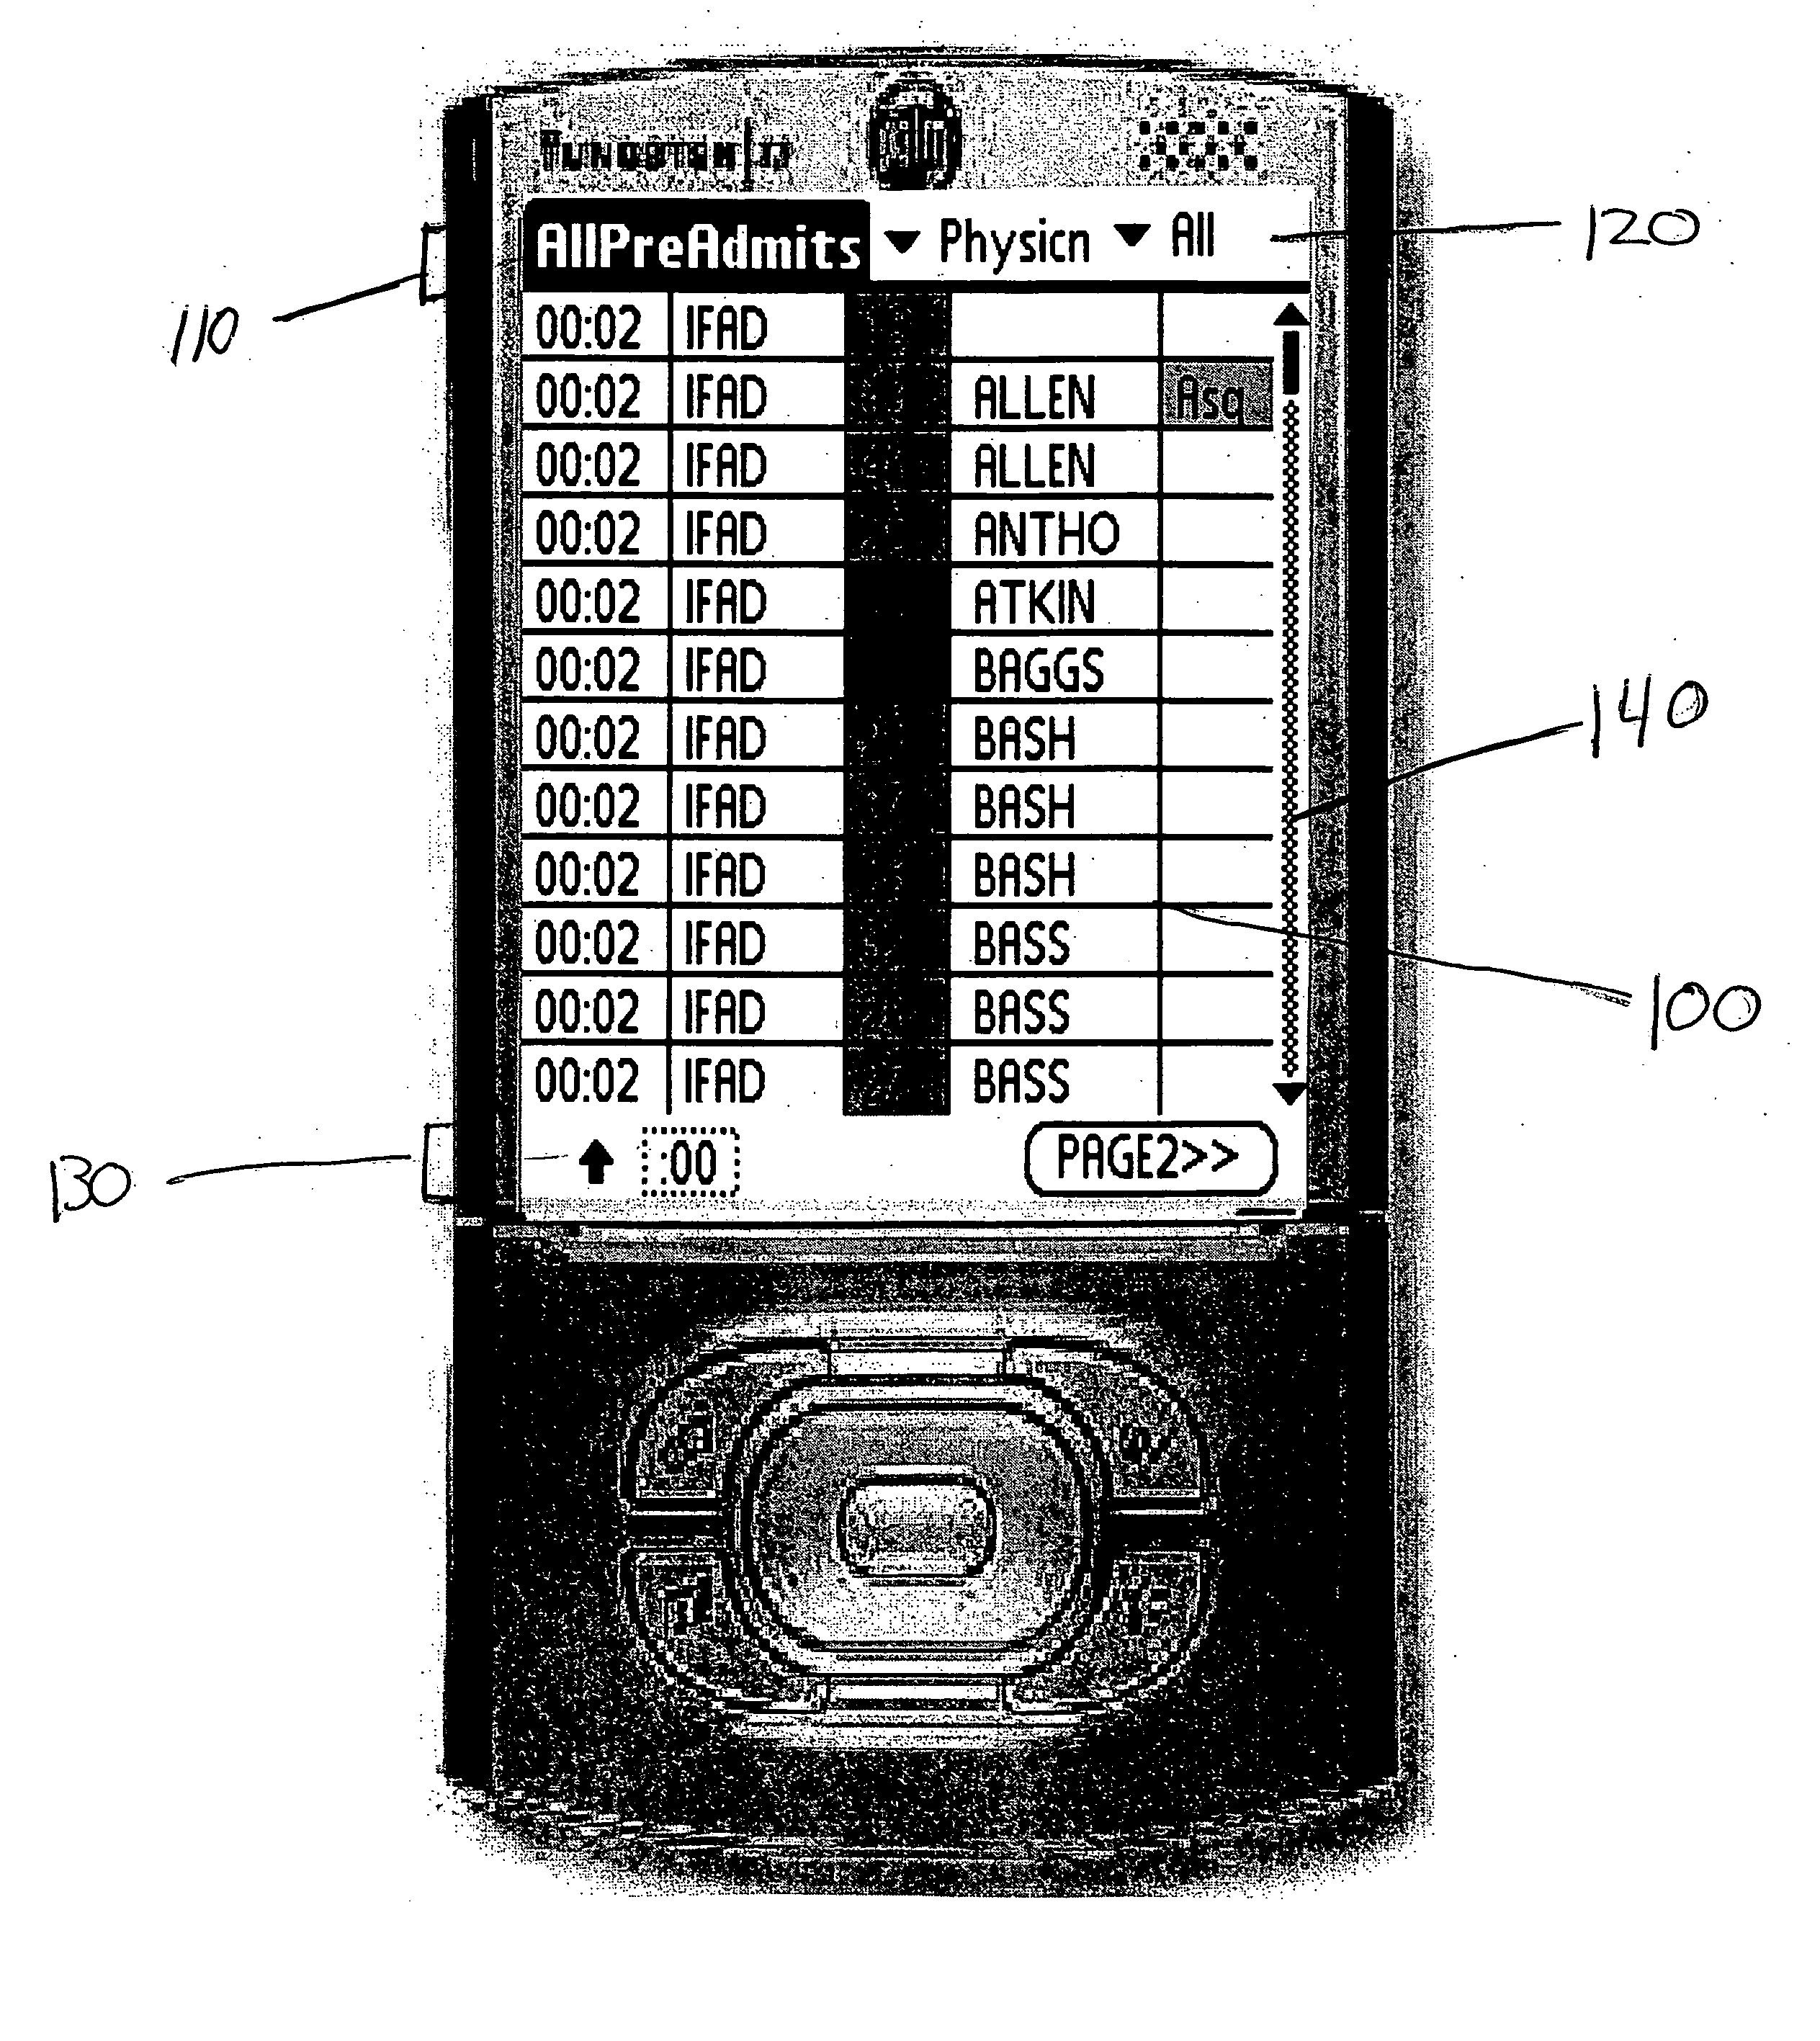 Apparatus and method for the mobile visual display and modification of bed management information and patient placement information